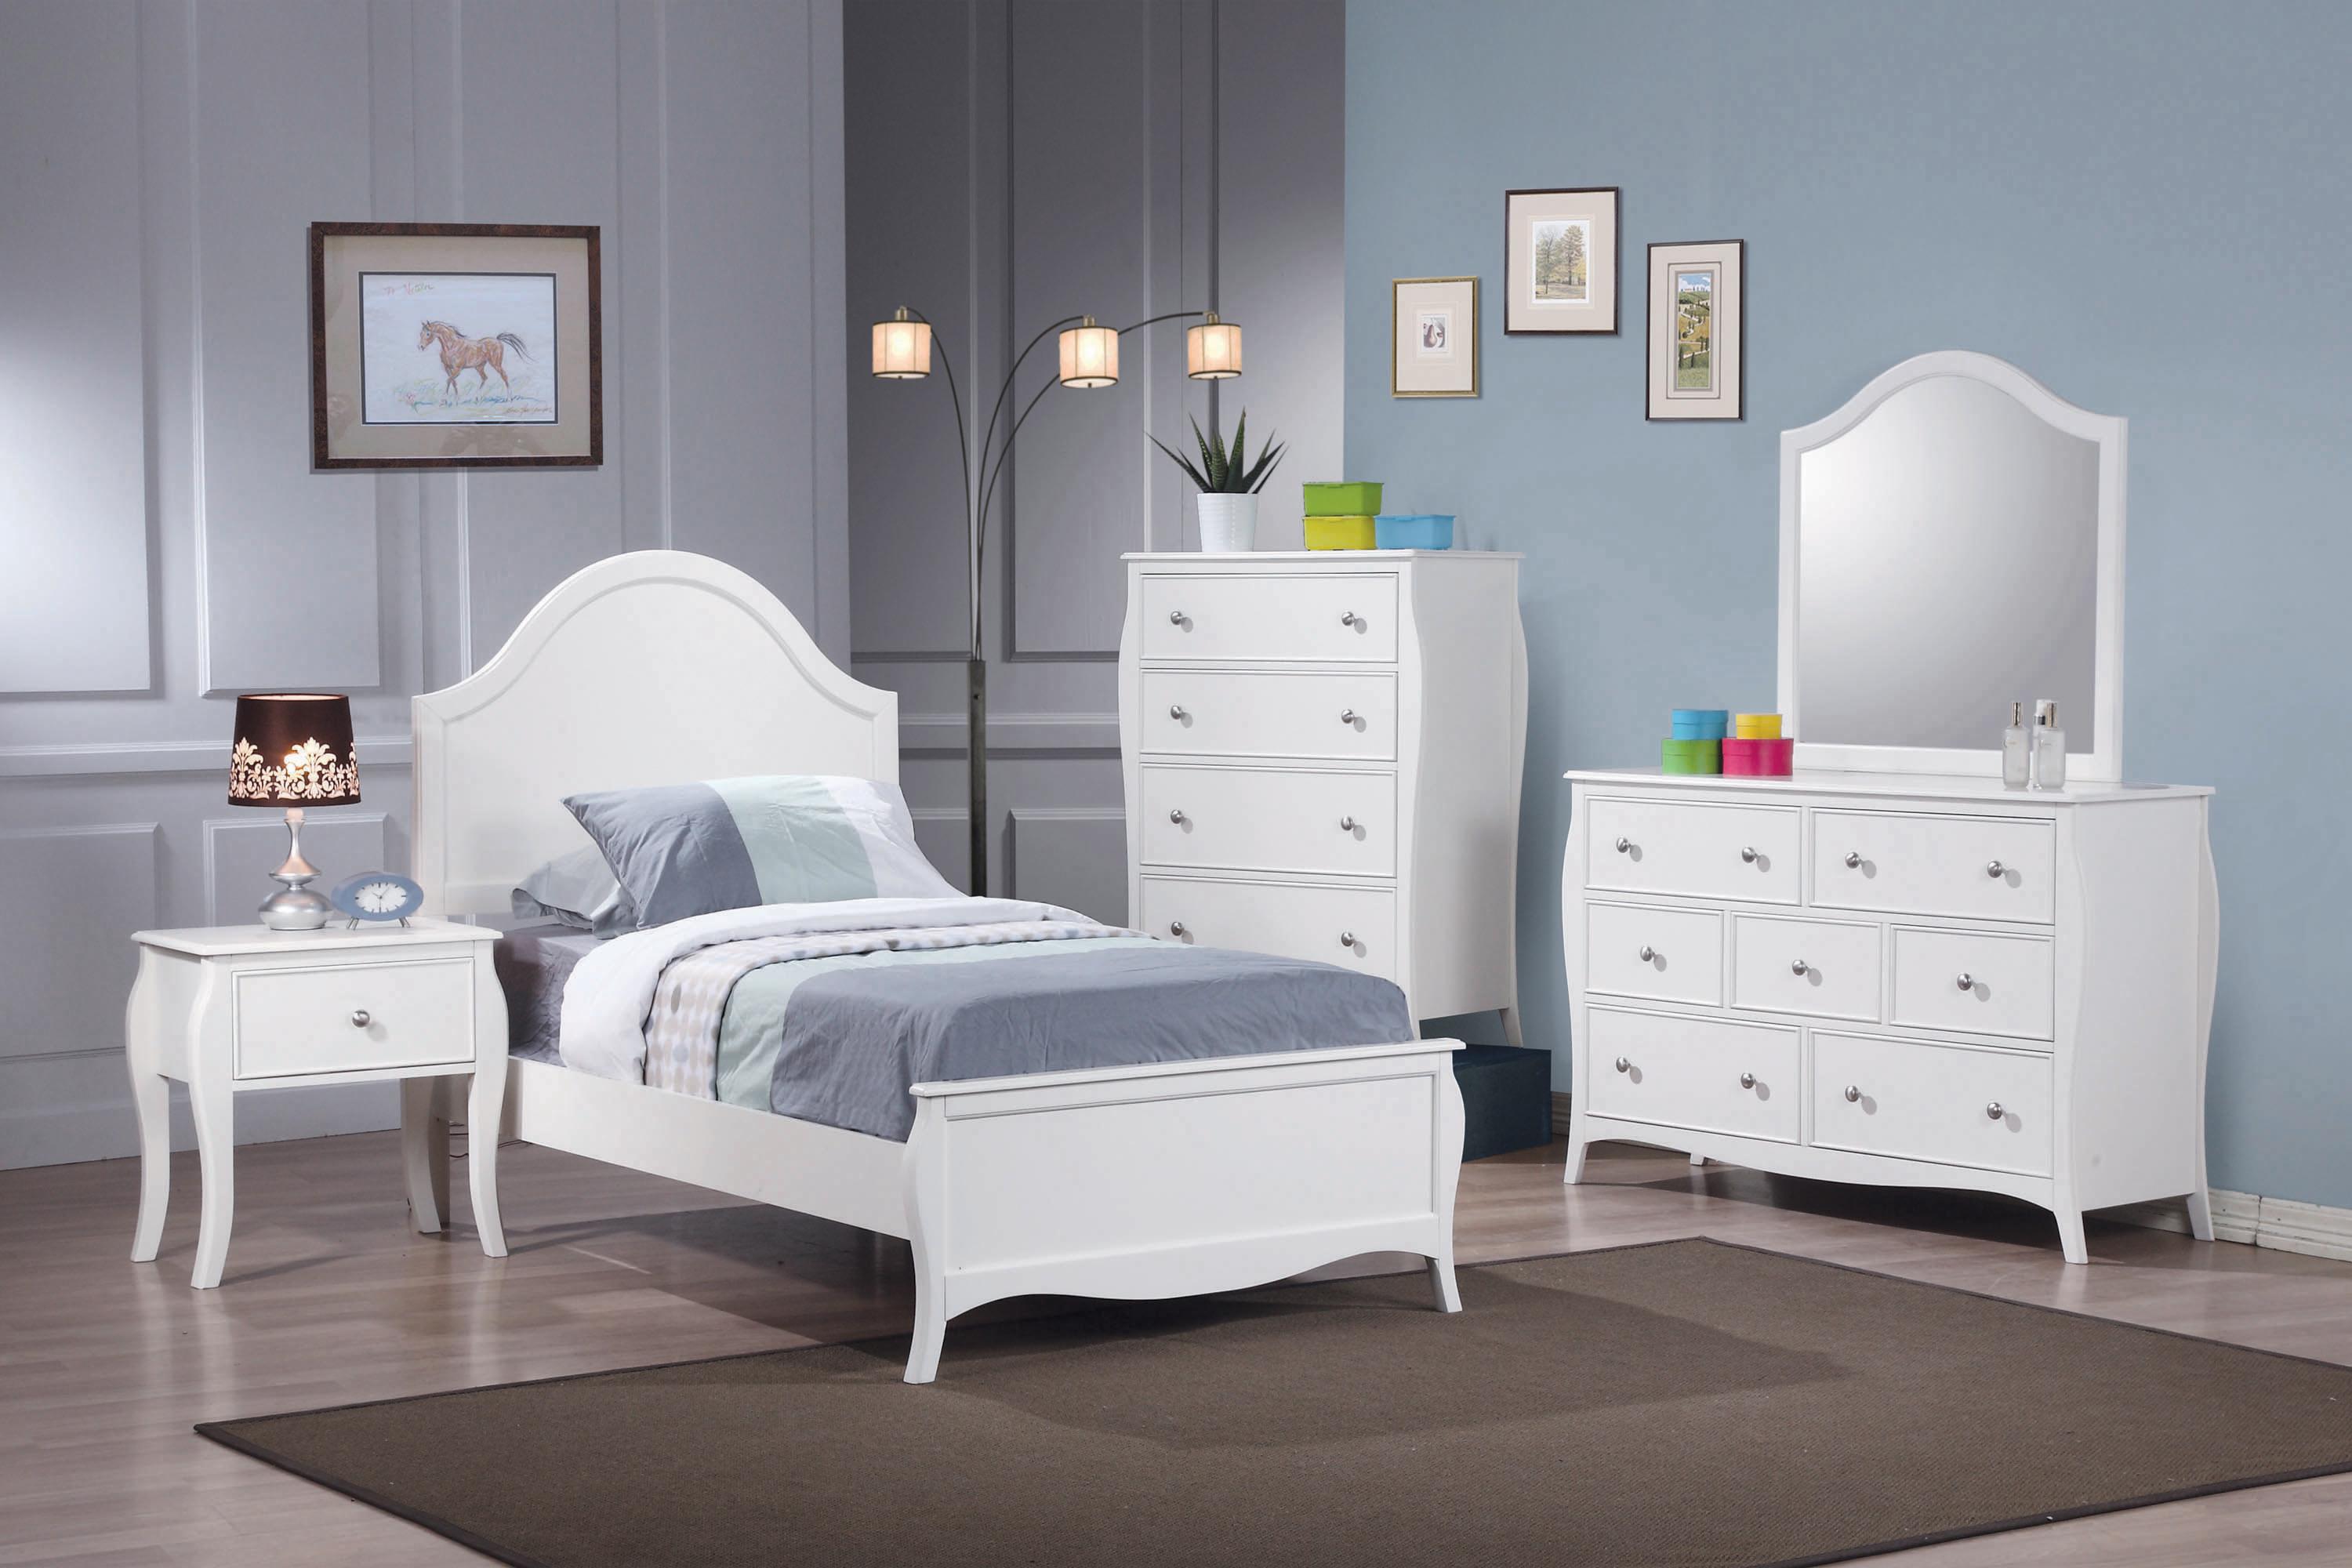 Traditional Bedroom Set 400561T-5PC Dominique 400561T-5PC in White 